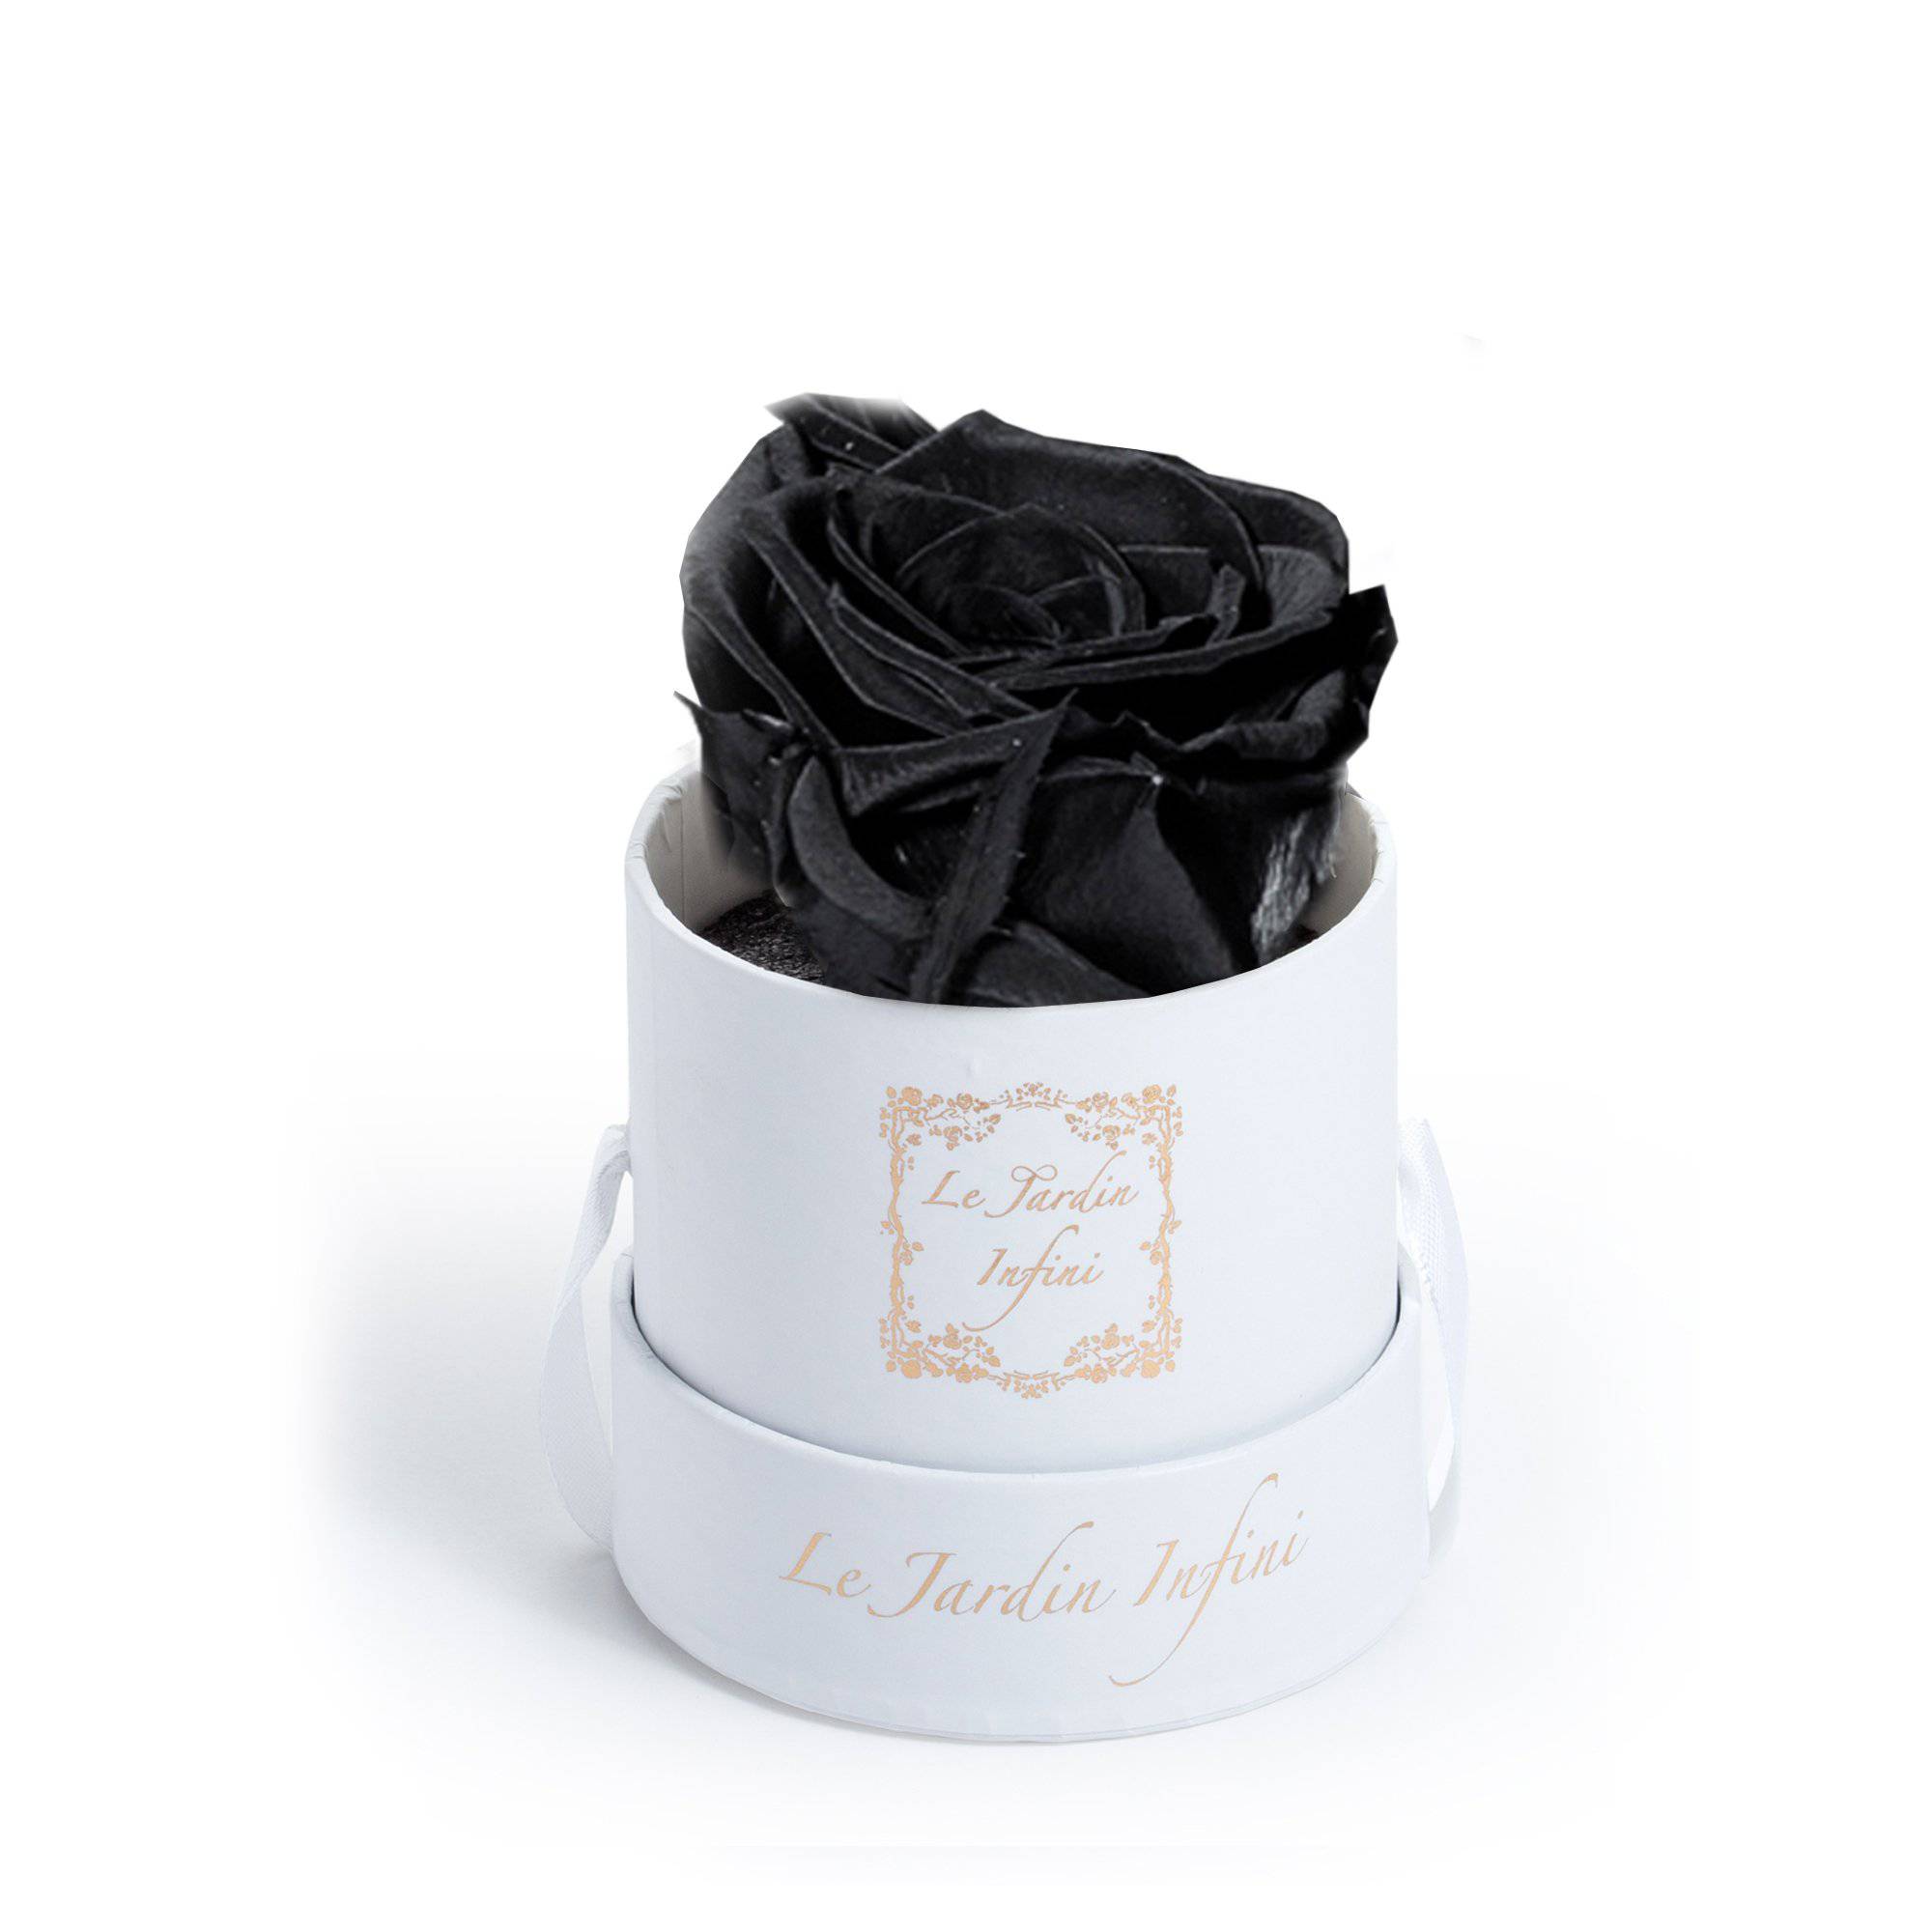 Black Preserved Rose in a Box - Small Round White Box - Le Jardin Infini Roses in a Box